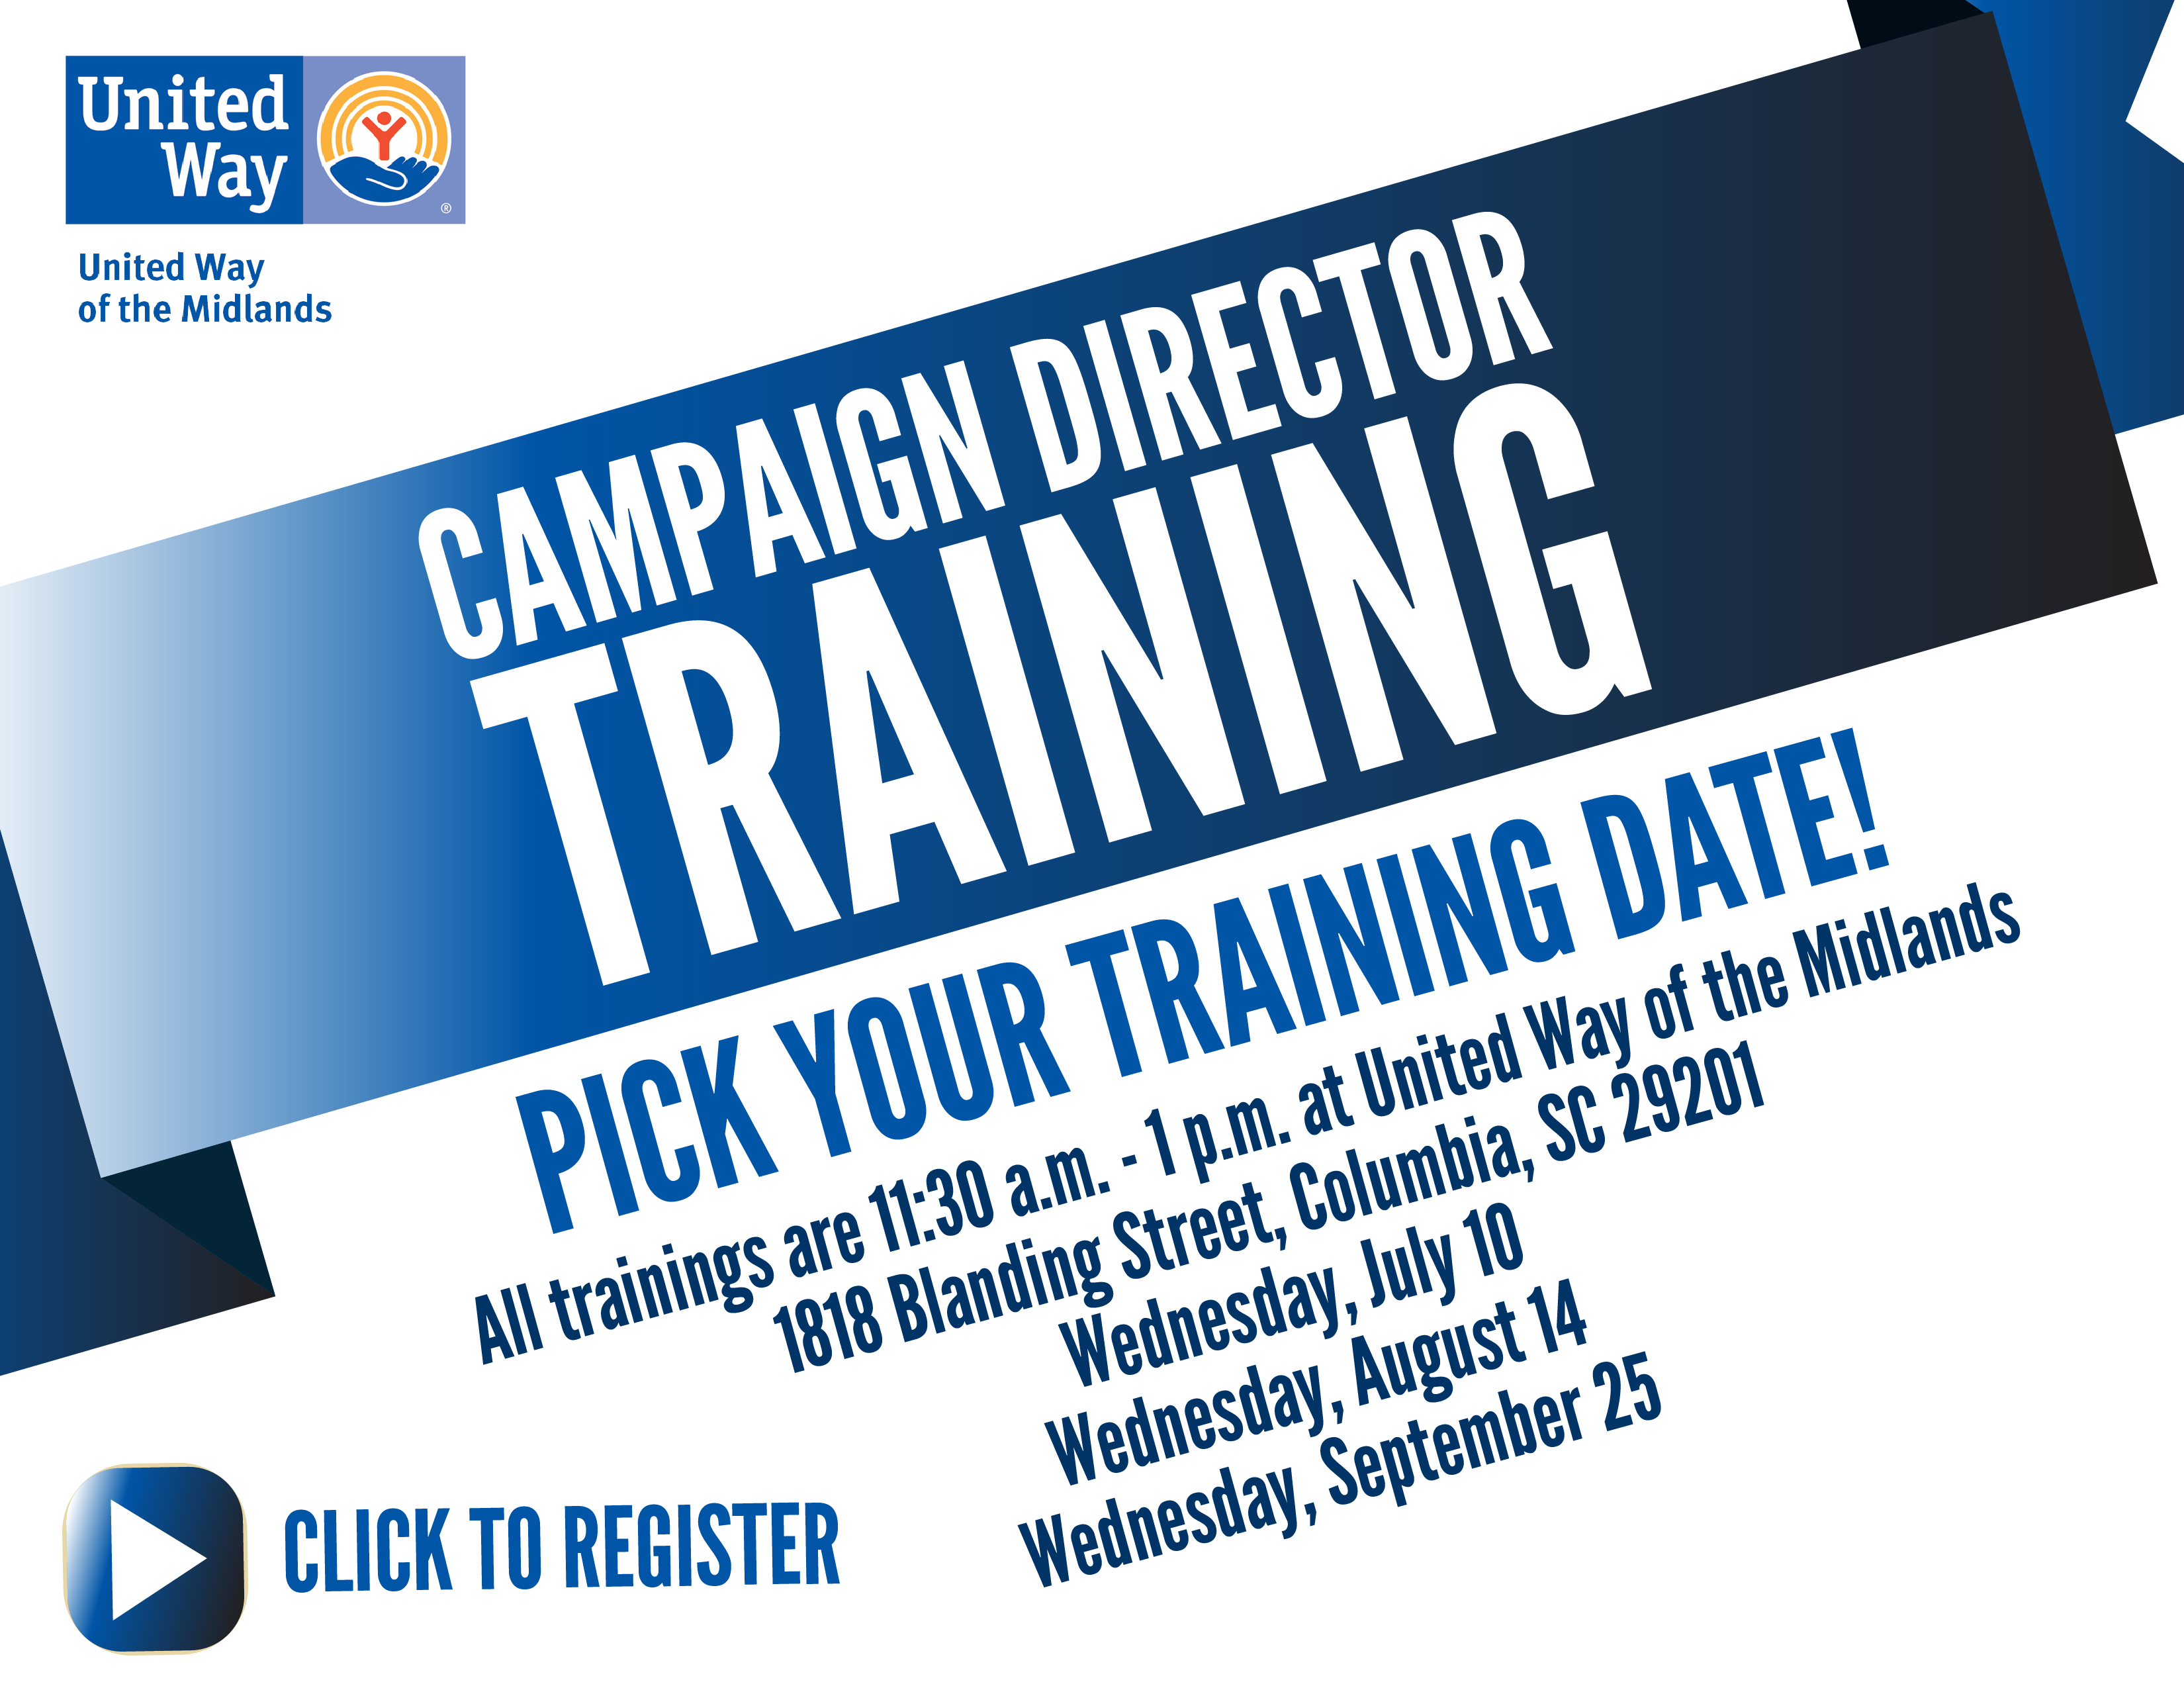 Campaign Director Training Graphic